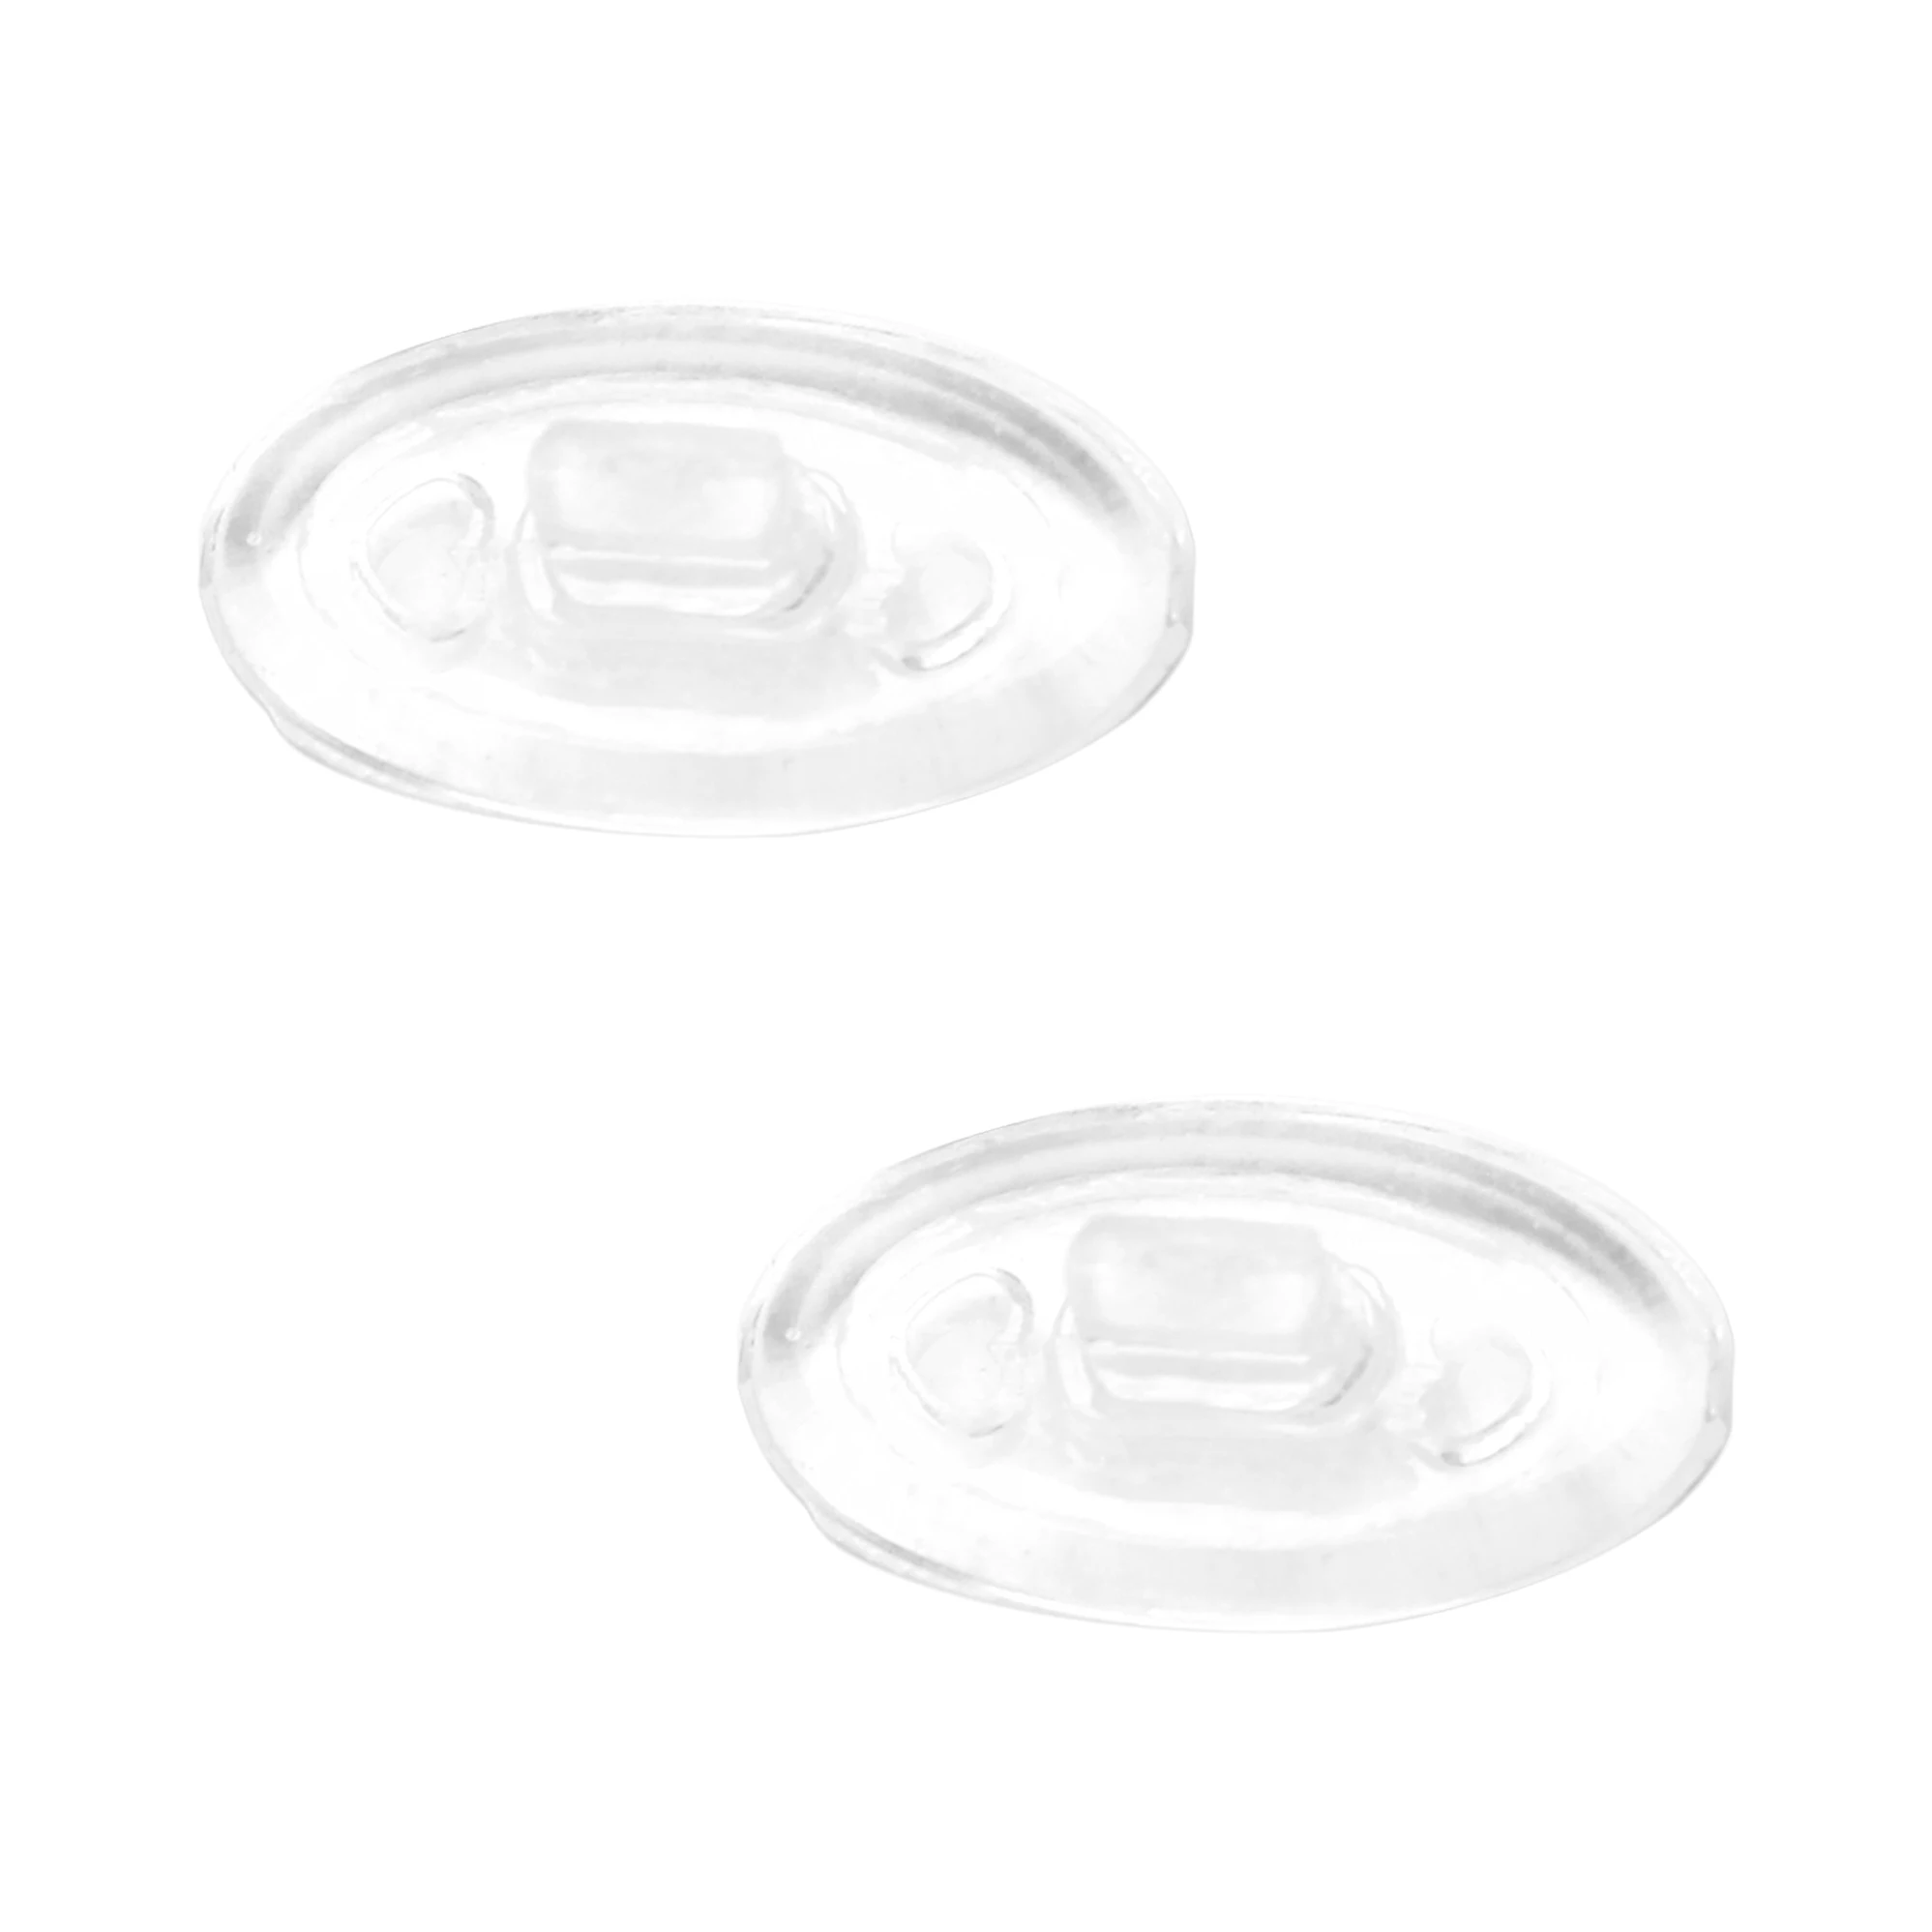 

TenDye Replacement Clear Nose Pads for Oakley Crosshair 1.0 | Crosshair 2.0 | Crosshair S Sunglasses, Push-on Snap-in Nose Piece